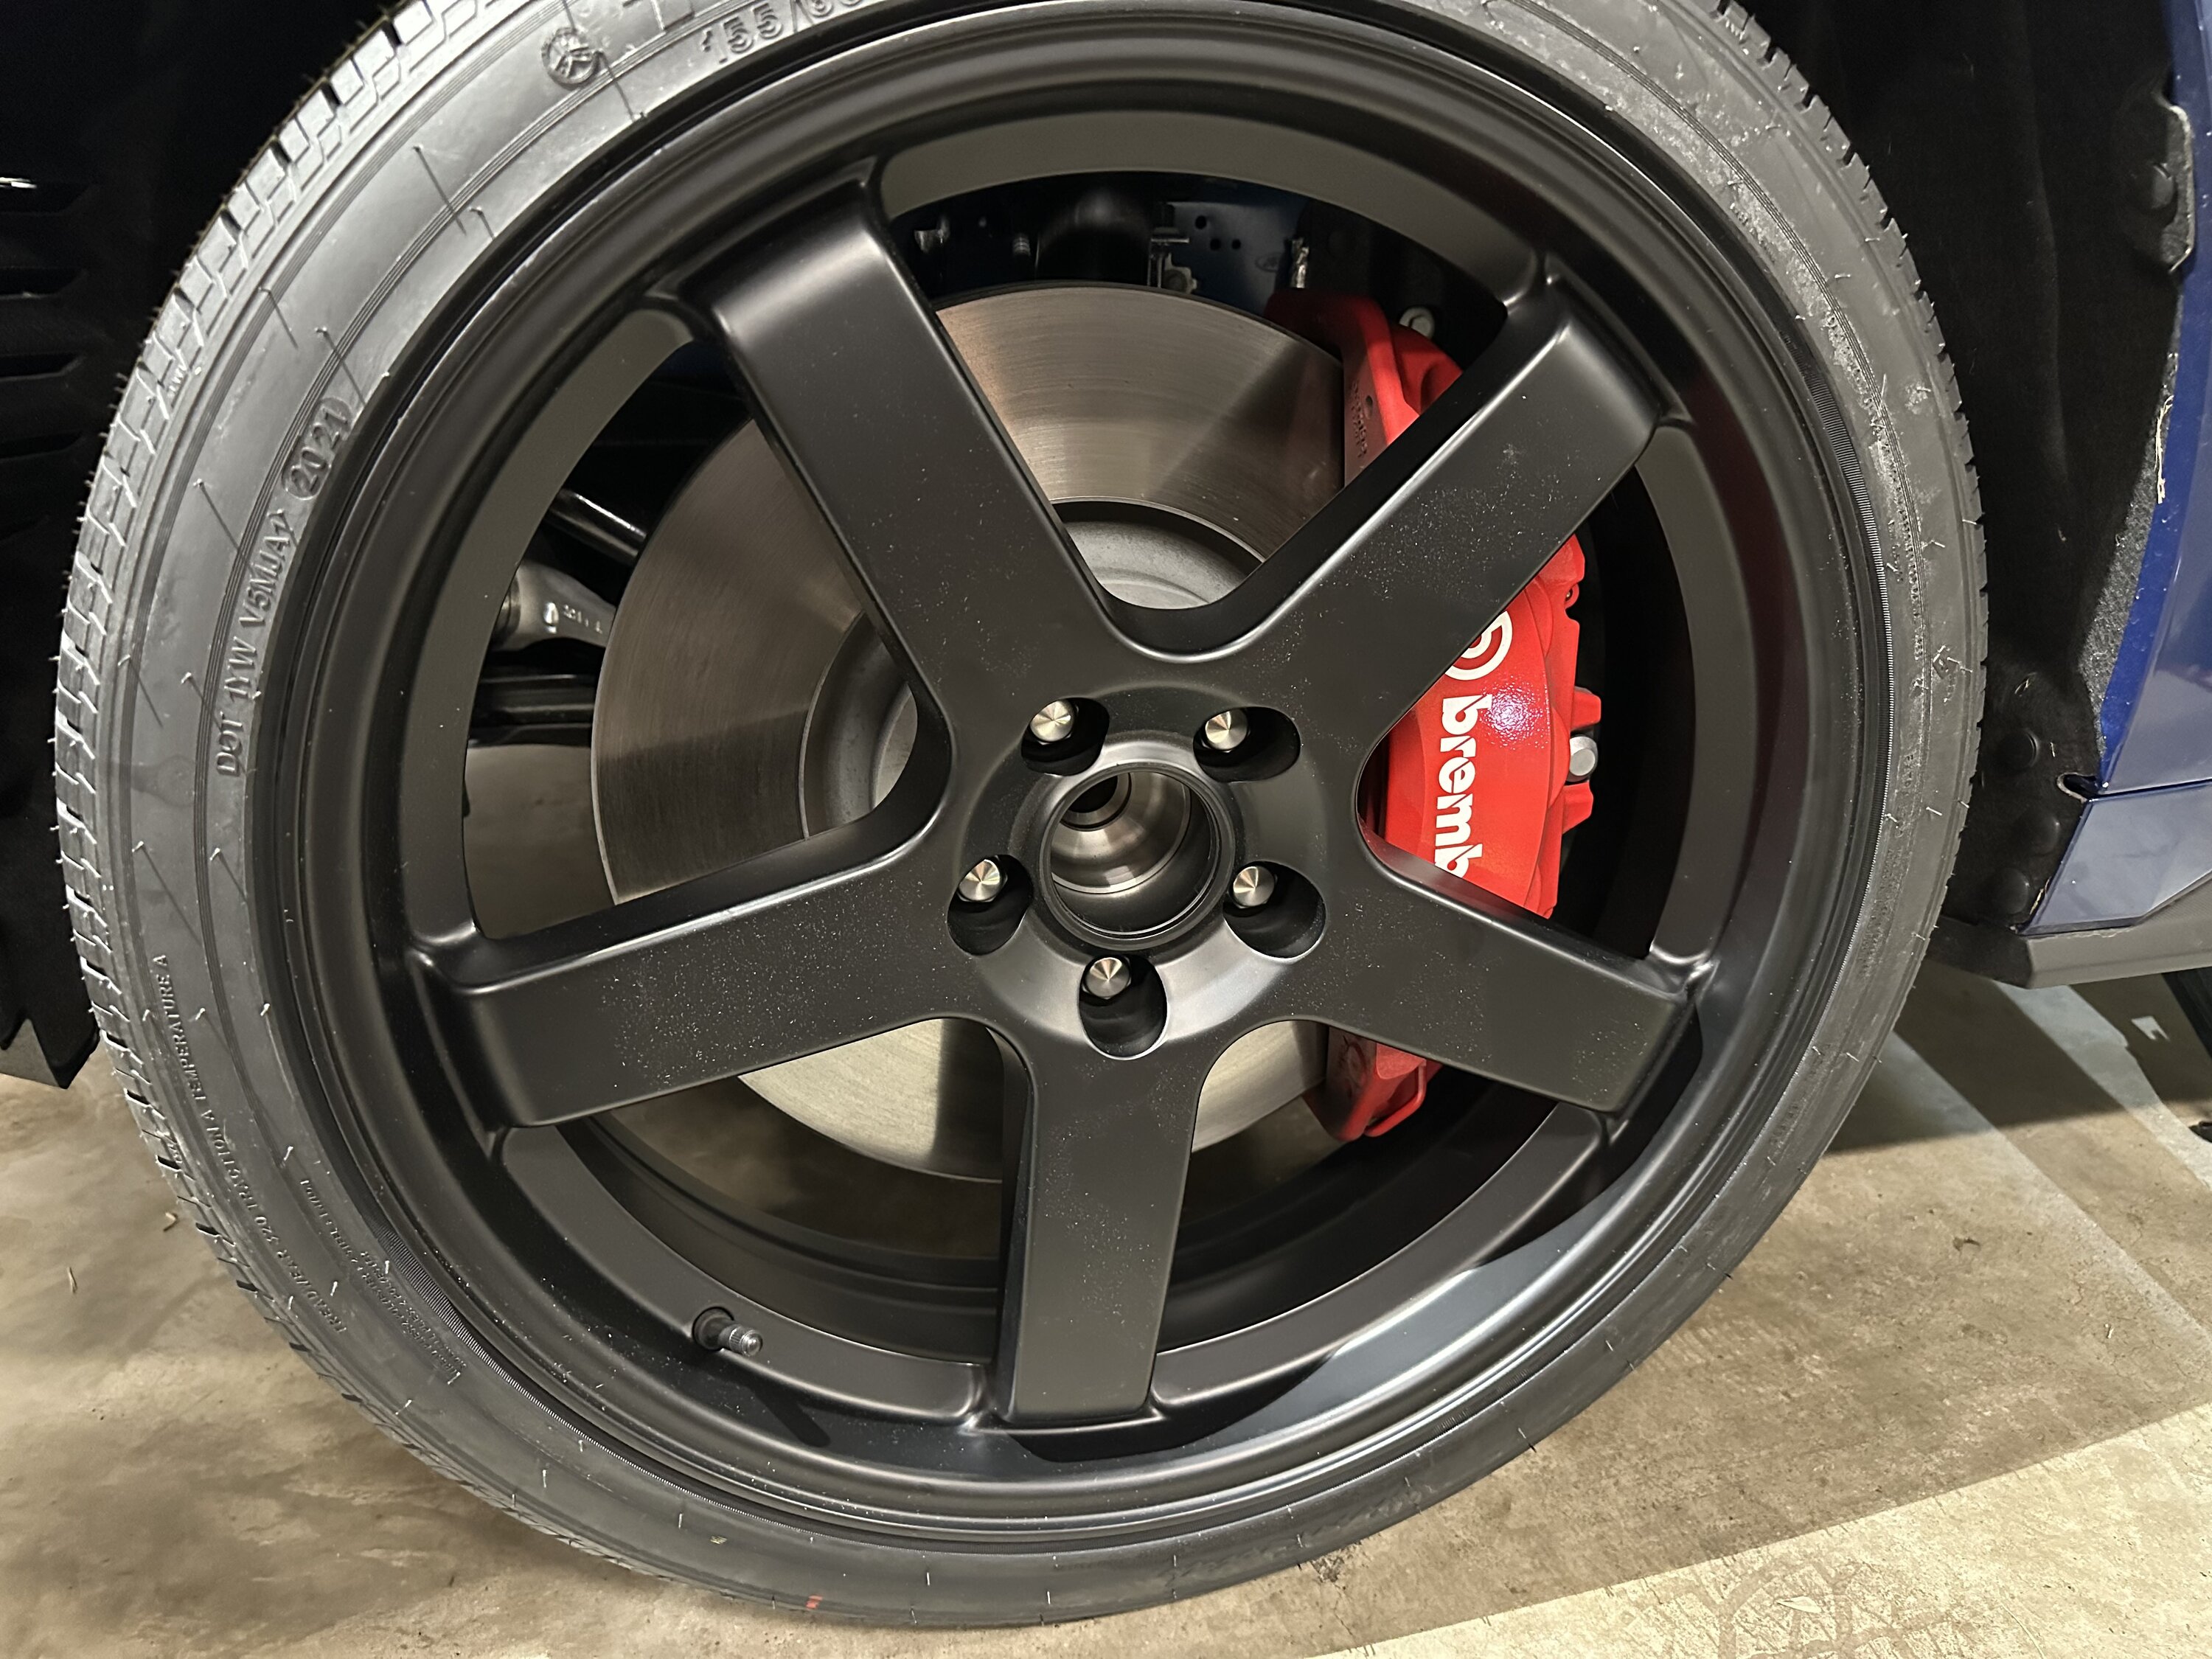 S650 Mustang Spare tire option for Performance Pack or standalone Brembo BBK kit -- tested IMG_7785